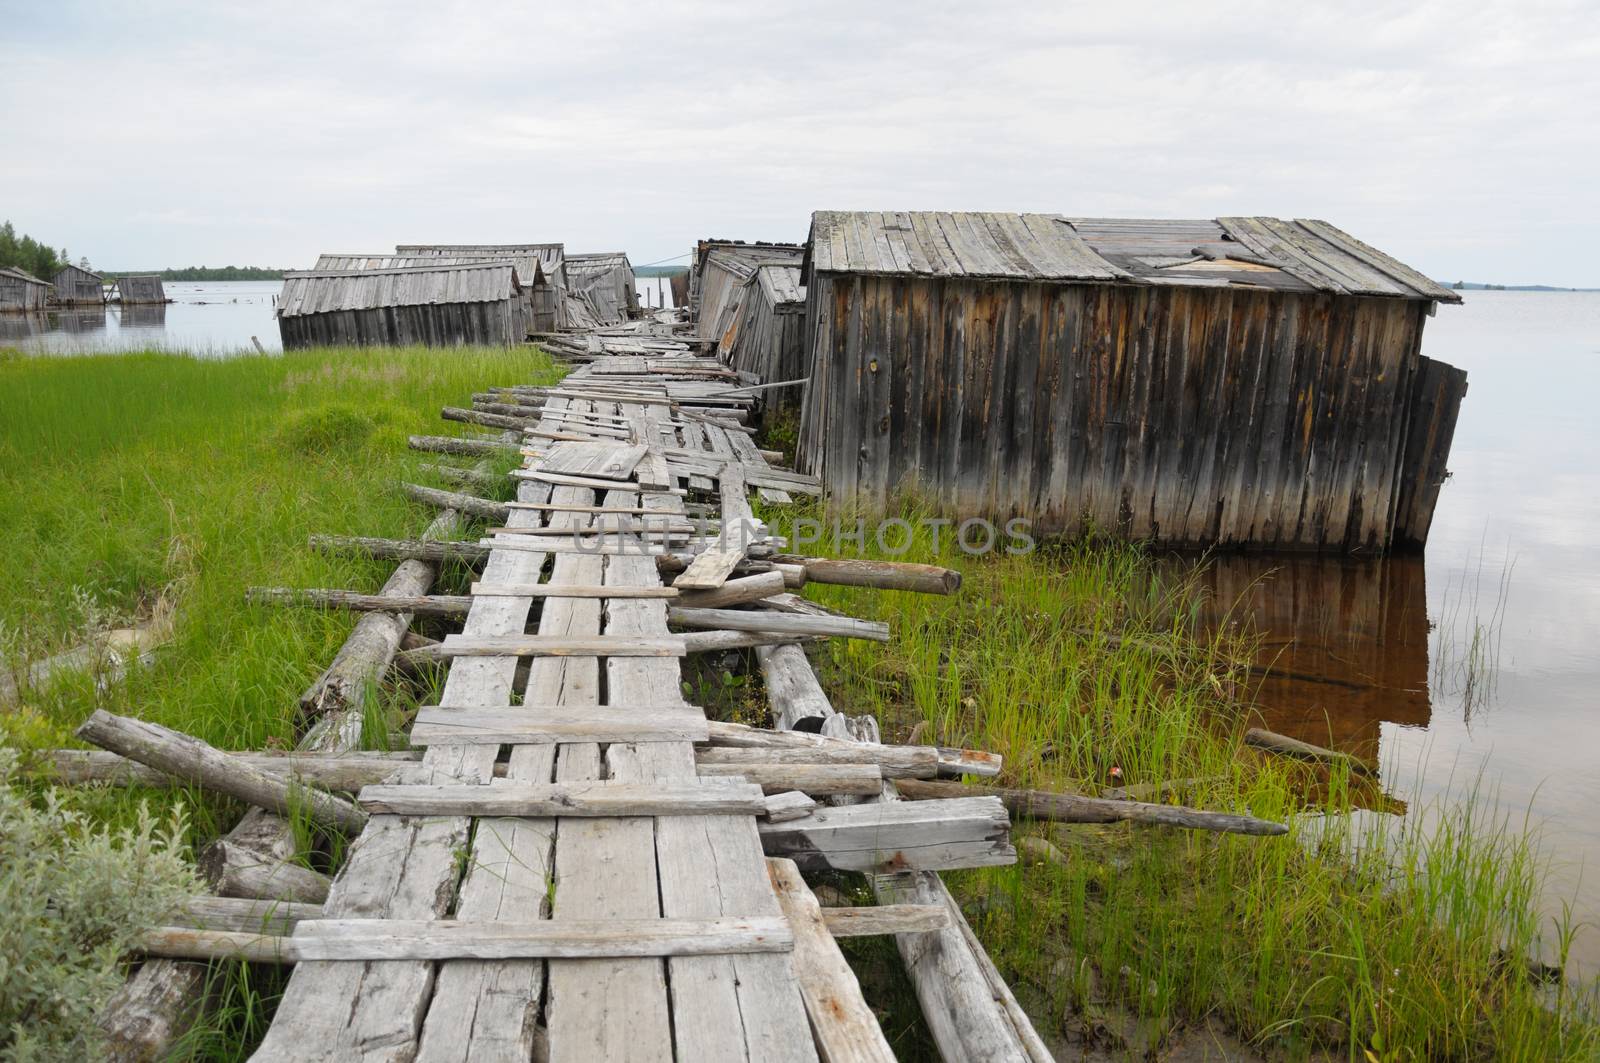 The picture shows abandoned and broken slip docs in a small settlement in Russia's Karelia region